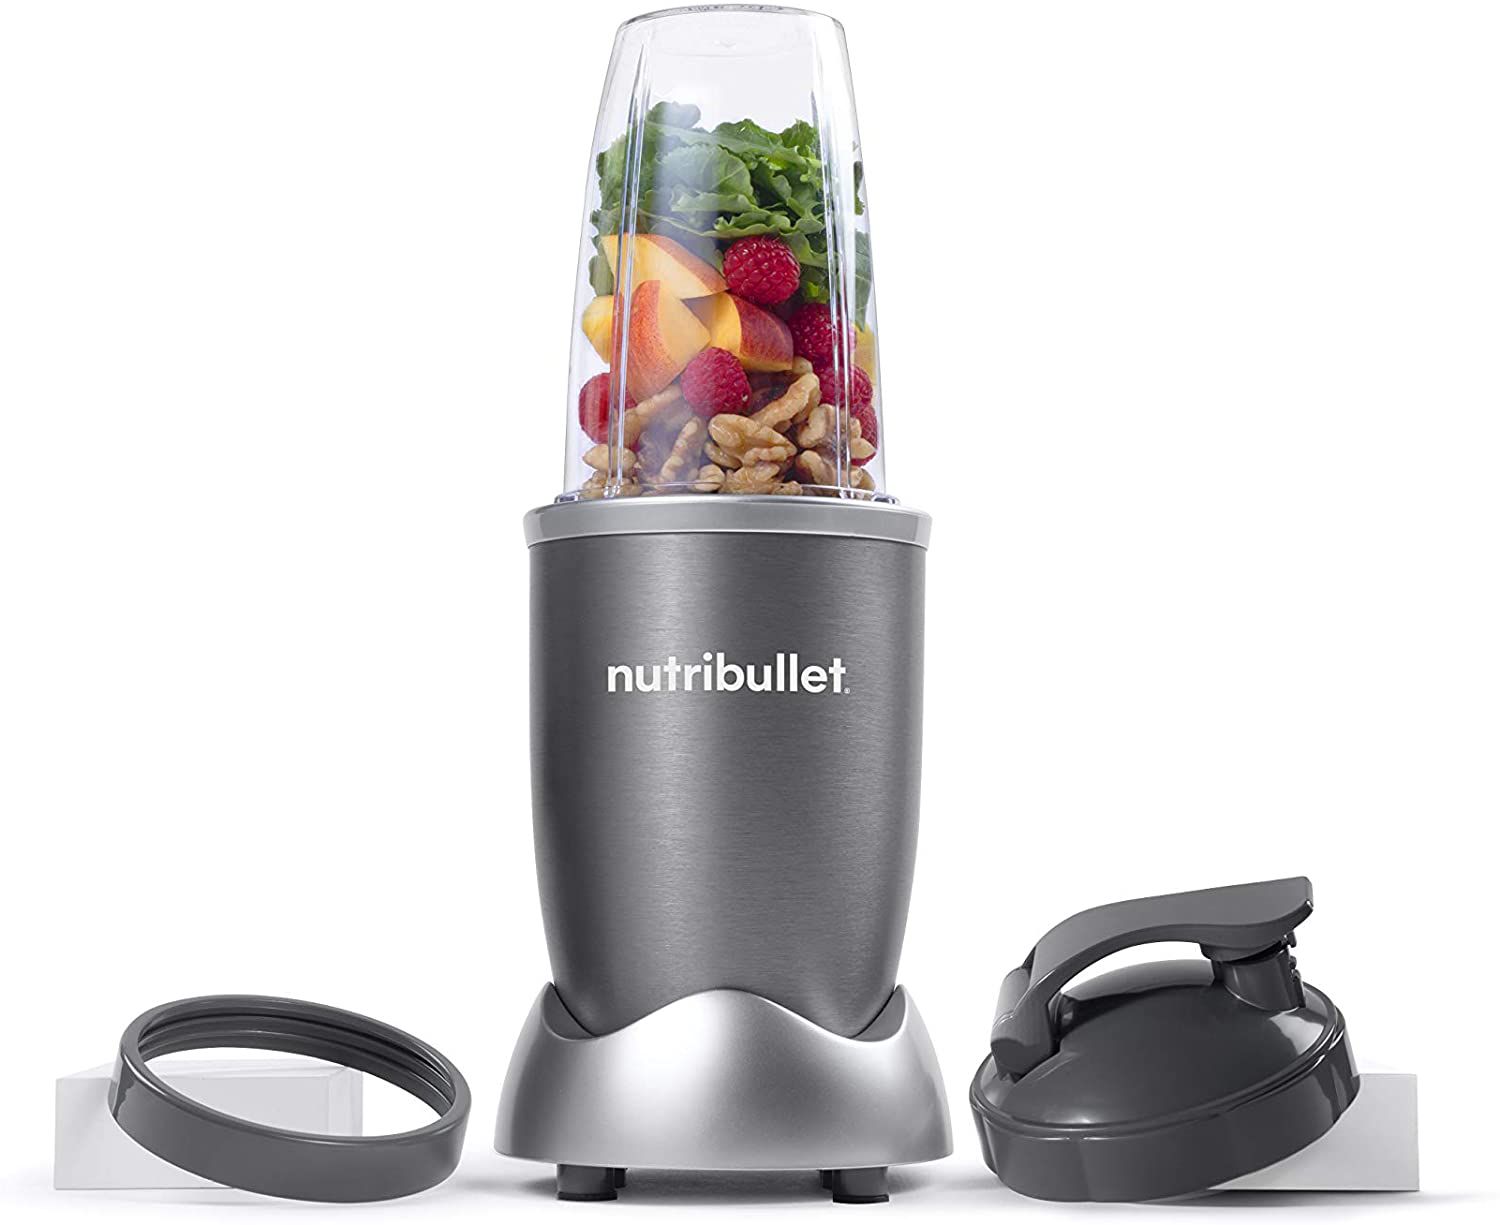 nutribullet blender with fruit inside and accessories